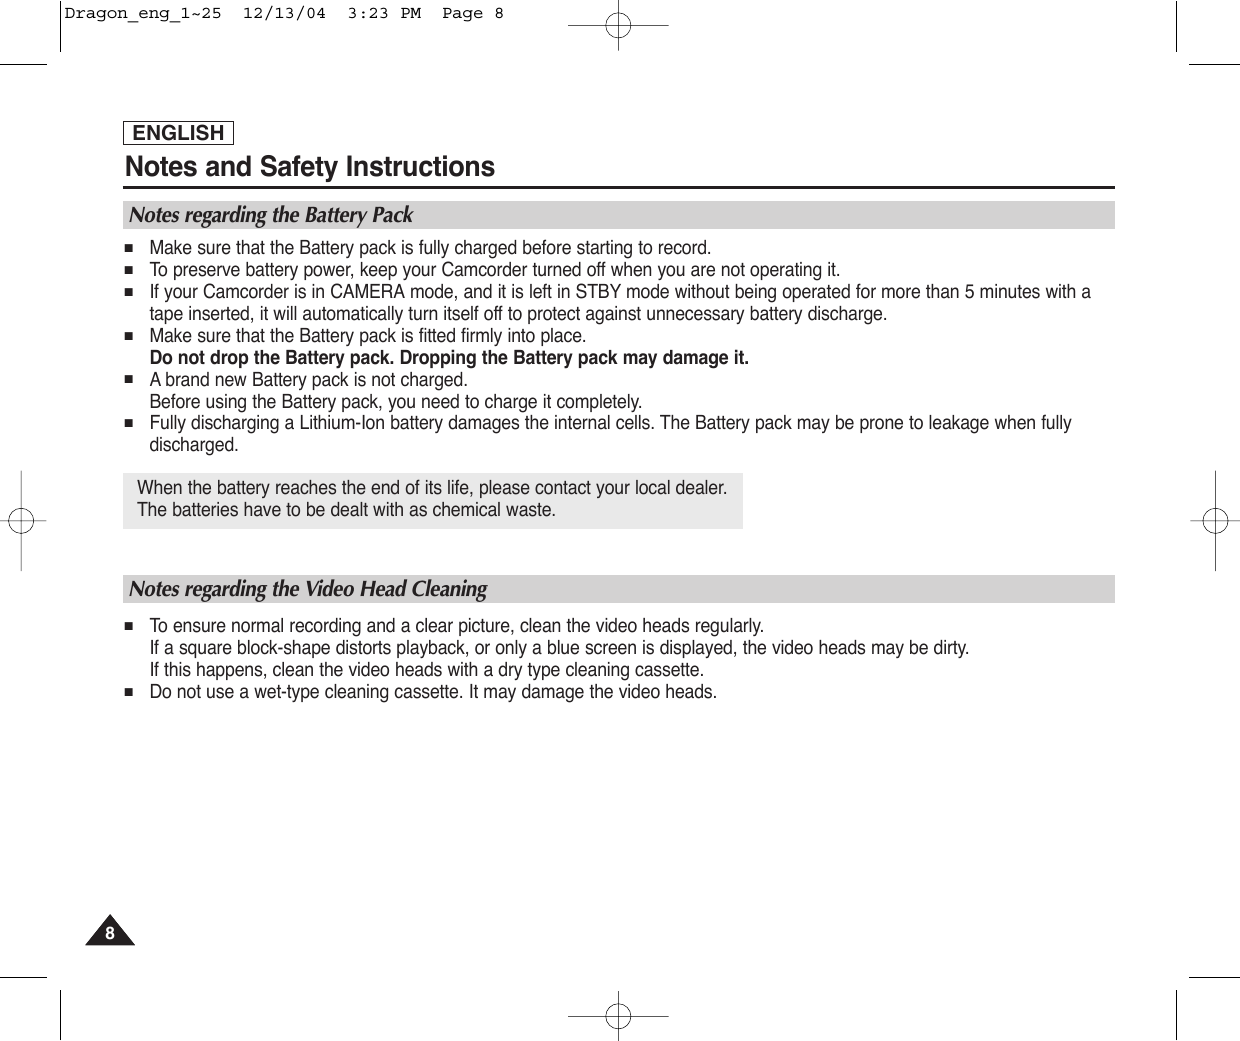 ENGLISHNotes and Safety Instructions88When the battery reaches the end of its life, please contact your local dealer. The batteries have to be dealt with as chemical waste. Notes regarding the Battery Pack■Make sure that the Battery pack is fully charged before starting to record.■To  preserve battery power, keep your Camcorder turned off when you are not operating it.■If your Camcorder is in CAMERA mode, and it is left in STBY mode without being operated for more than 5 minutes with atape inserted, it will automatically turn itself off to protect against unnecessary battery discharge.■Make sure that the Battery pack is fitted firmly into place.Do not drop the Battery pack. Dropping the Battery pack may damage it.■Abrand new Battery pack is not charged.Before using the Battery pack, you need to charge it completely.■Fully discharging a Lithium-Ion battery damages the internal cells. The Battery pack may be prone to leakage when fullydischarged.Notes regarding the Video Head Cleaning■To  ensure normal recording and a clear picture, clean the video heads regularly. If a square block-shape distorts playback, or only a blue screen is displayed, the video heads may be dirty. If this happens, clean the video heads with a dry type cleaning cassette.■Do not use a wet-type cleaning cassette. It may damage the video heads.Dragon_eng_1~25  12/13/04  3:23 PM  Page 8